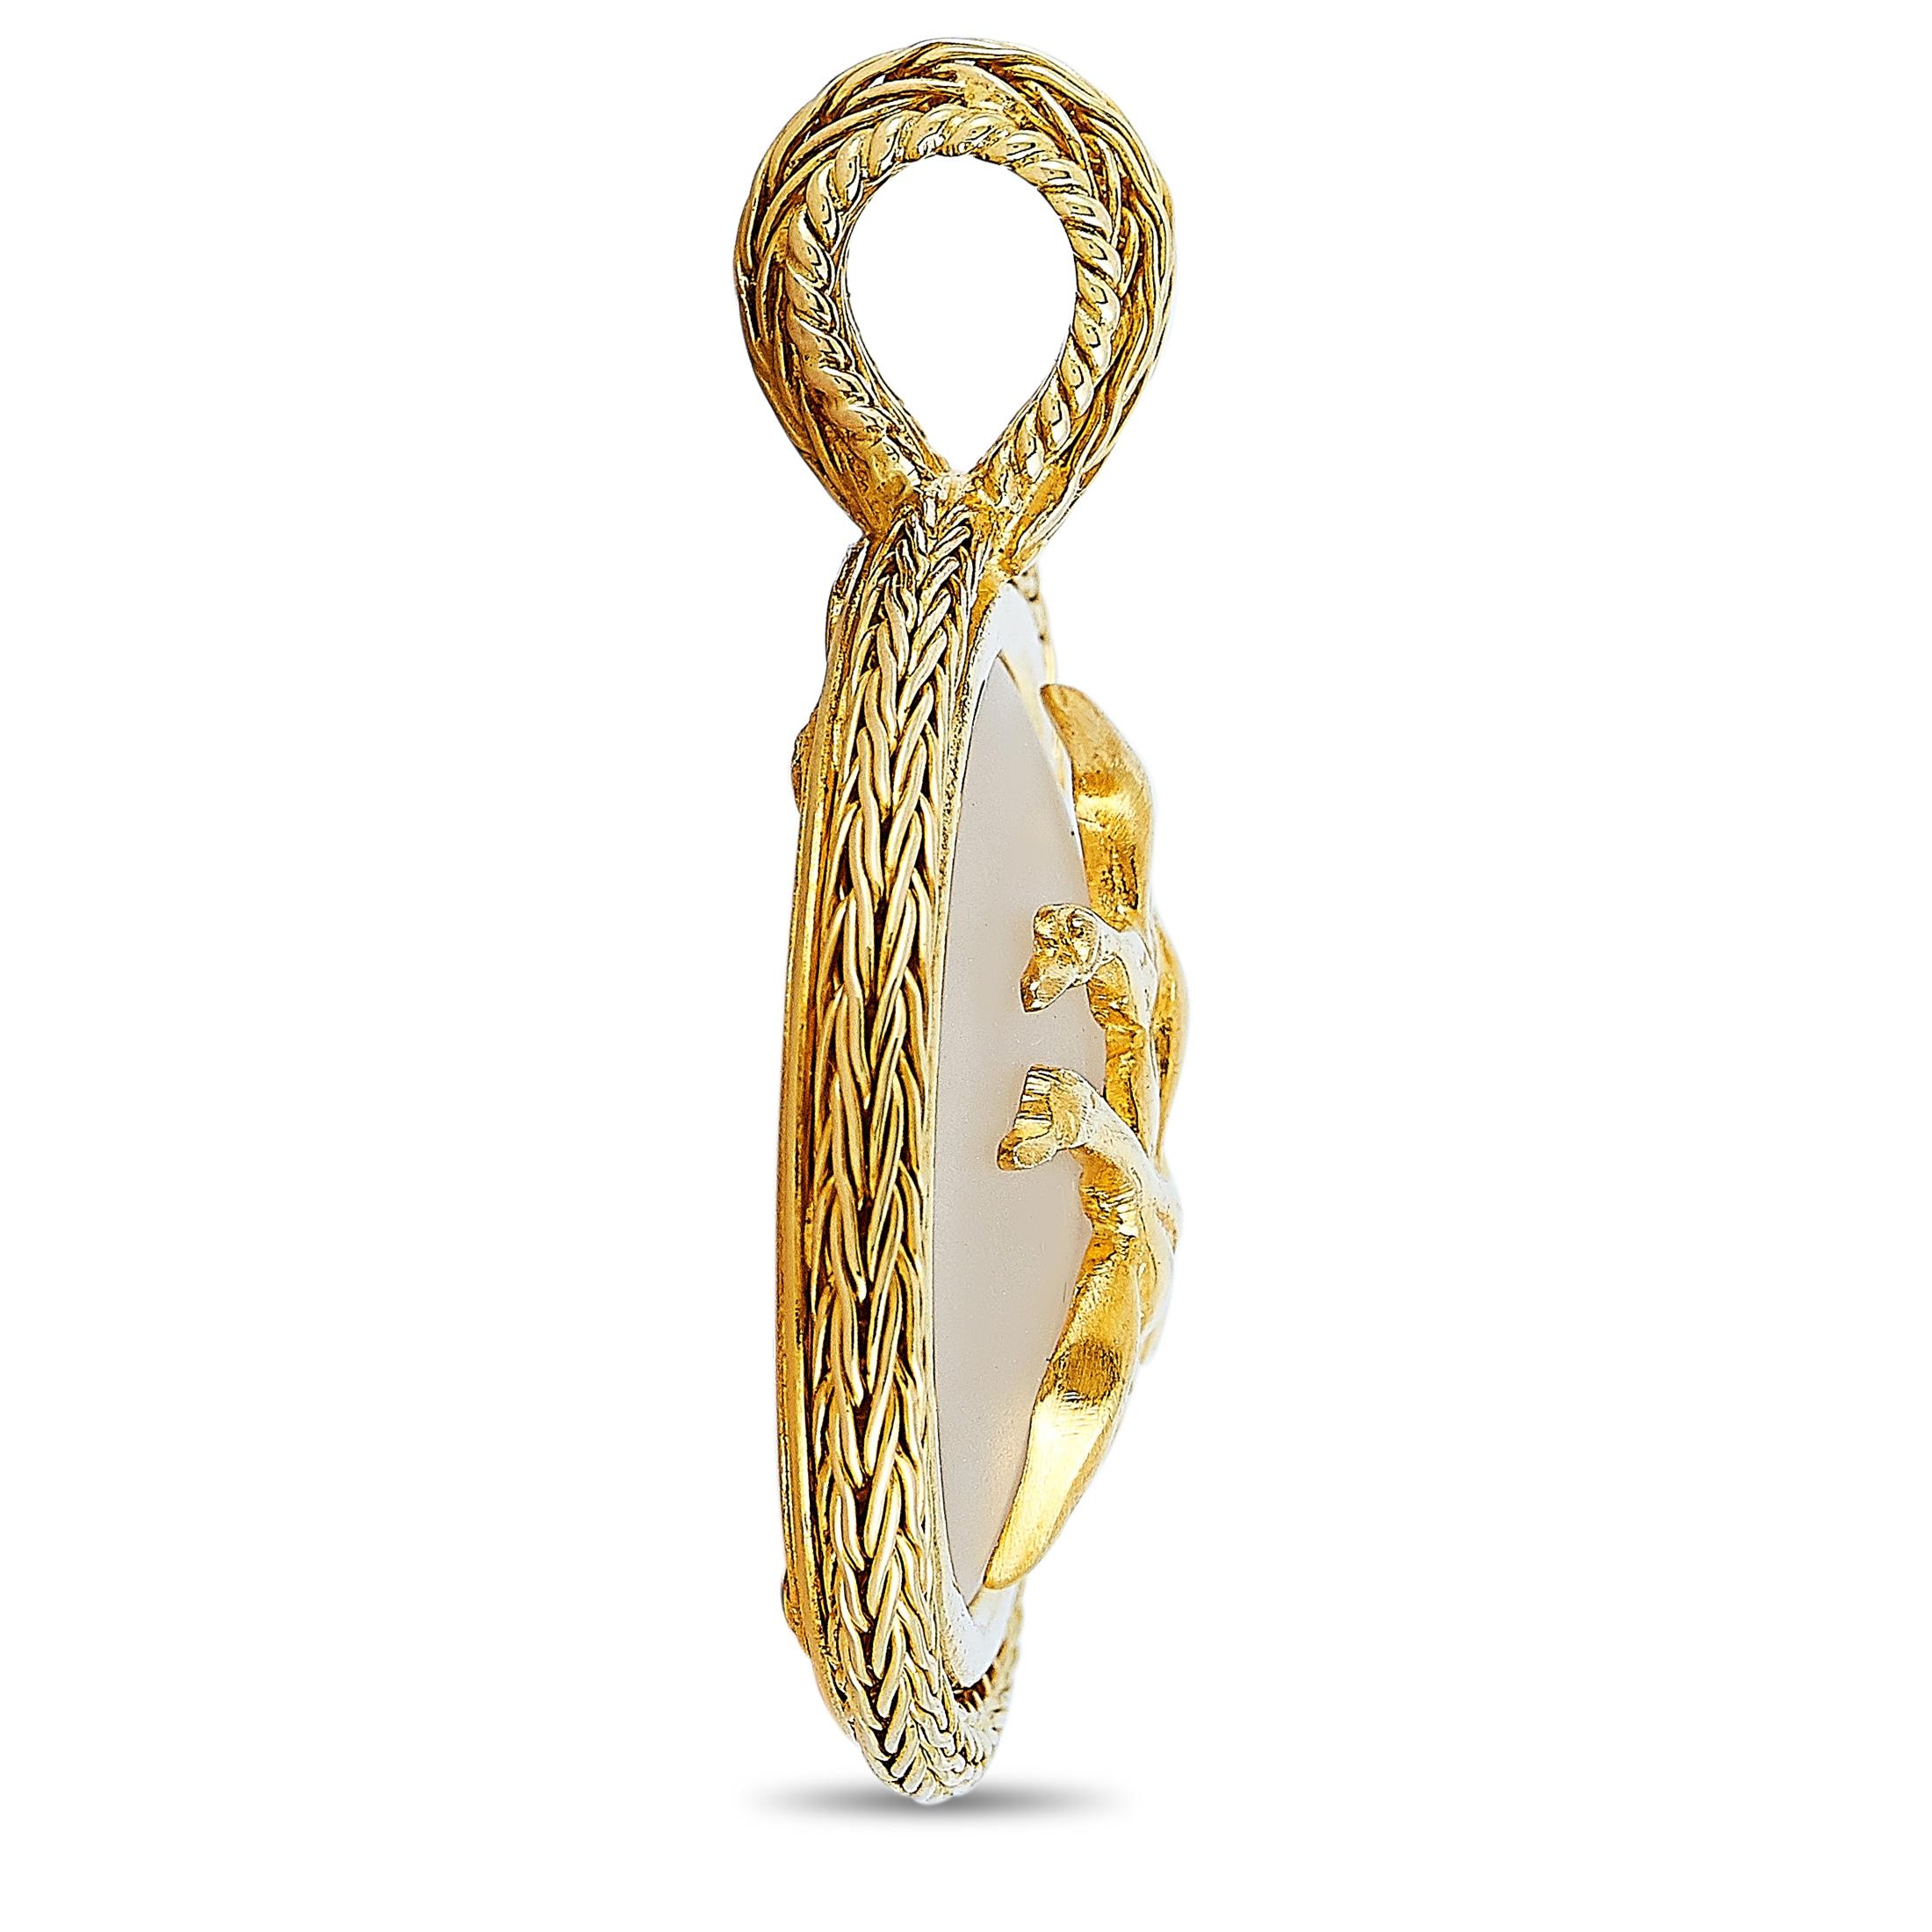 This Ilias Lalaounis pendant with flying geese motif is made out of 18K yellow gold and crystal and weighs 25.4 grams. It measures 1.75” in length and 1.70” in width.